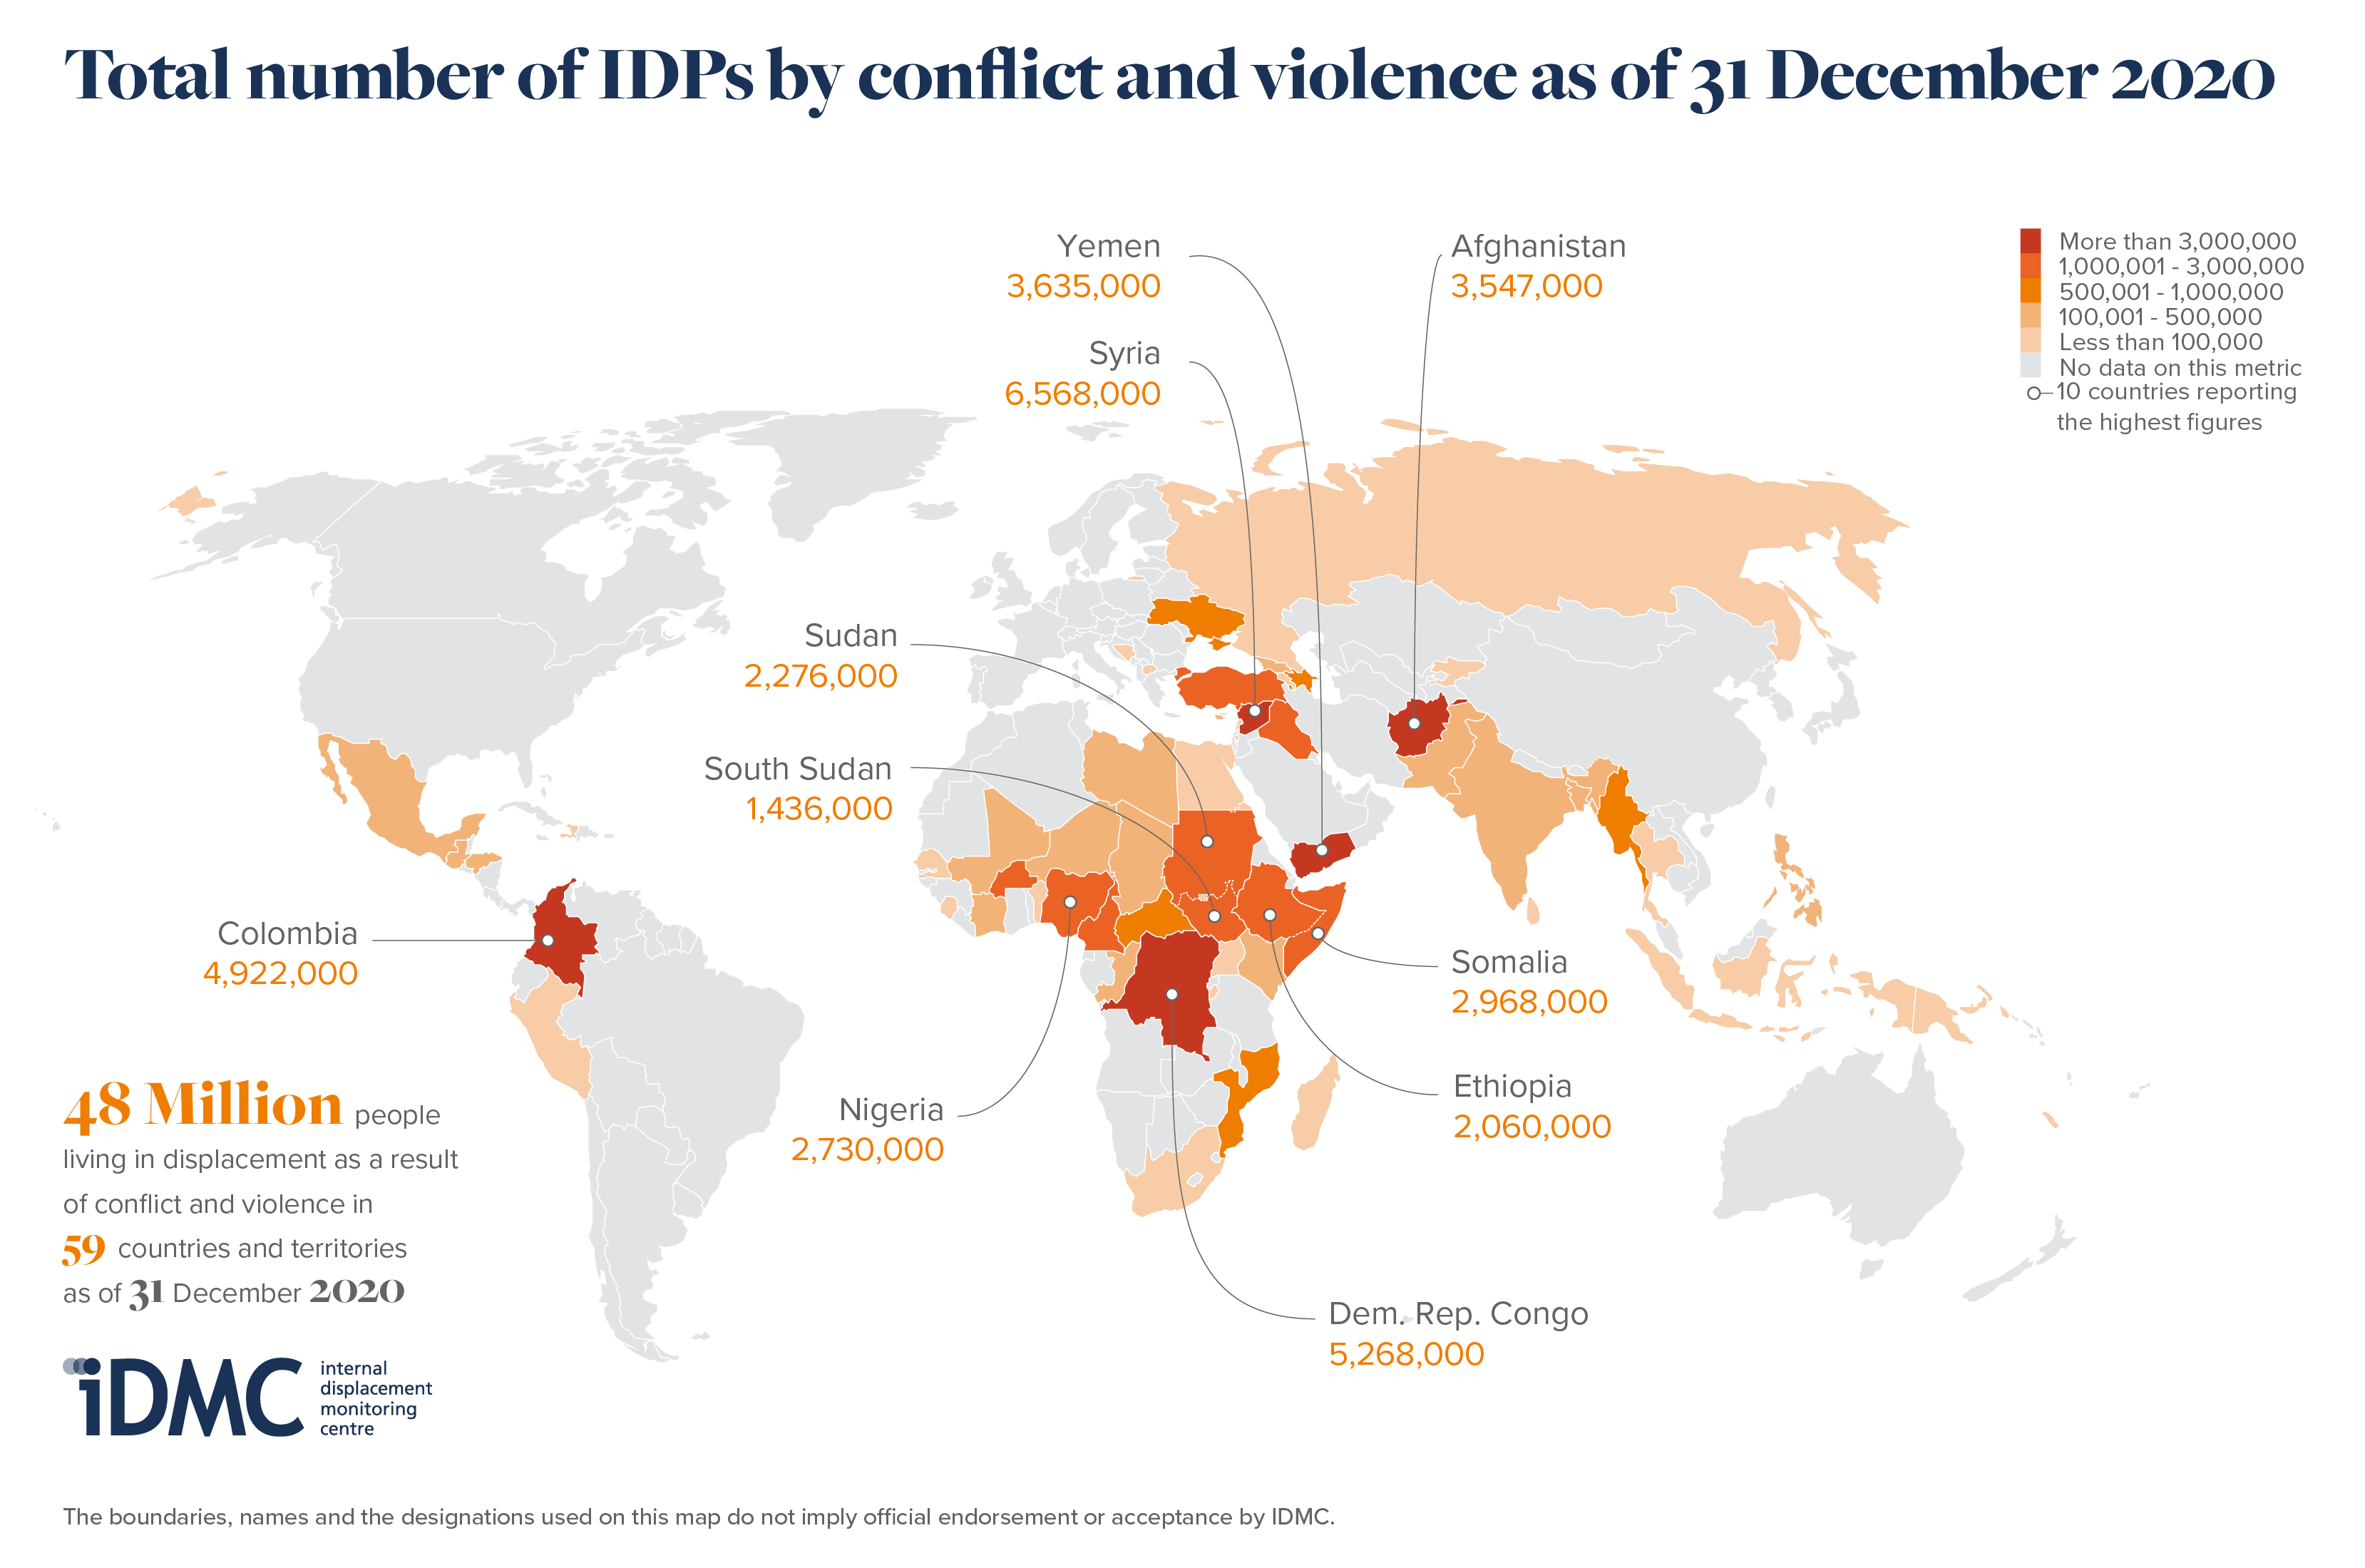 IDMC GRID2021 Total Number of IDPs by Conflict and Violence as of 31 Decemeber 2020